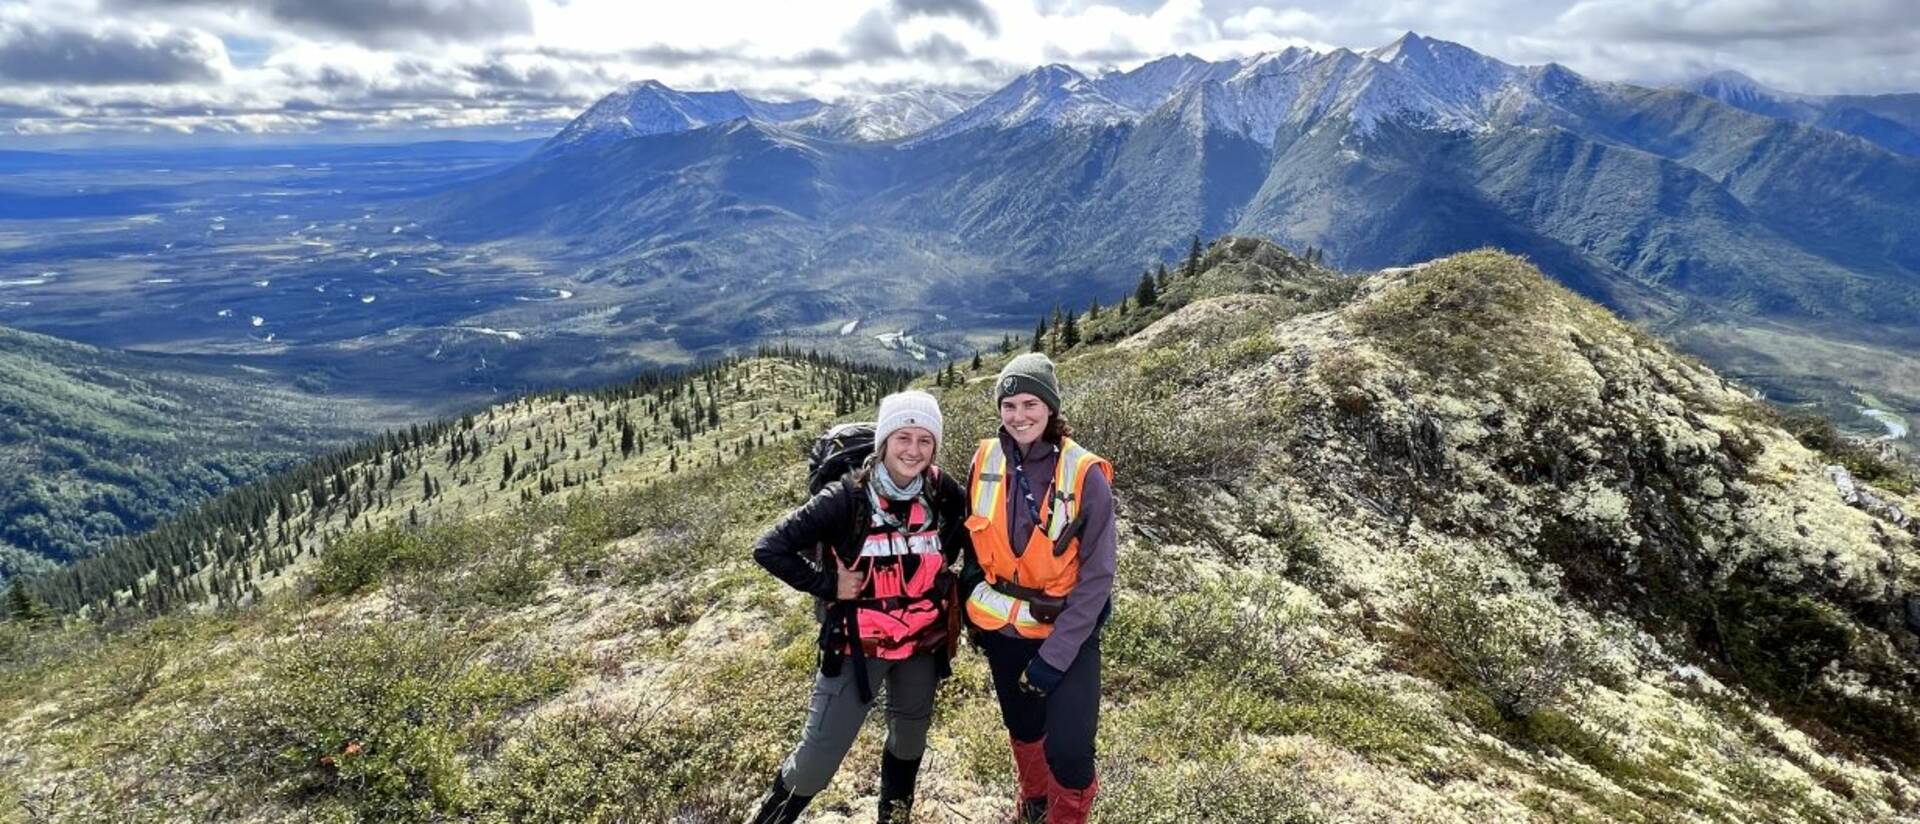 Geology majors Bryanna Rayhorn (left) and Lindsey Henricks spent their summer living on a mountain range above the Arctic Circle while working for the geological consulting firm in northern Alaska.